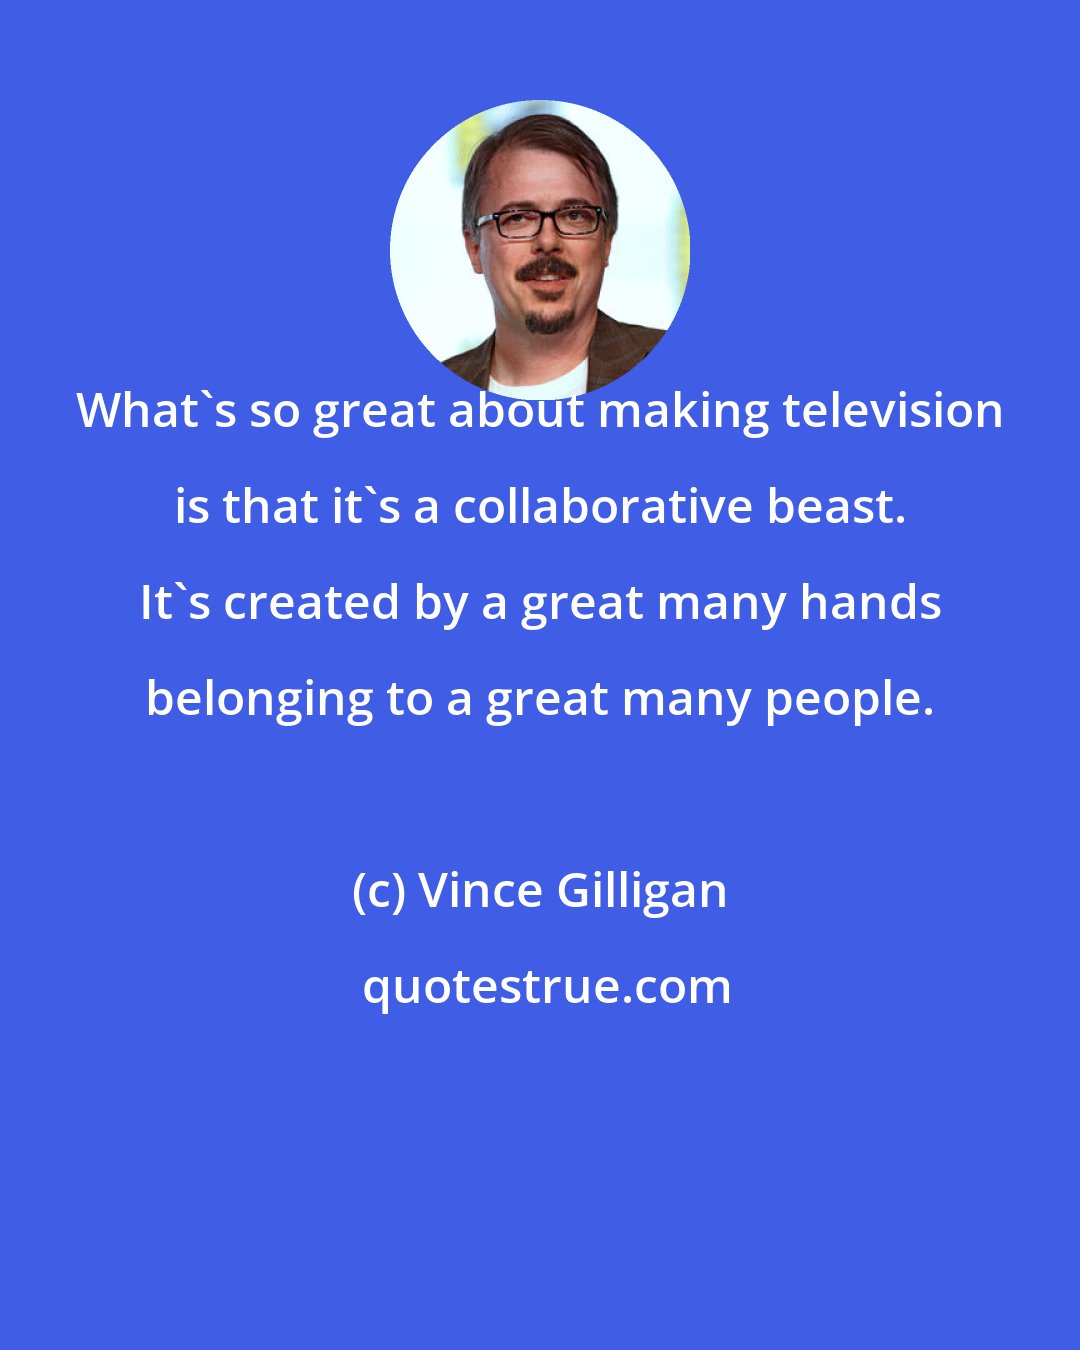 Vince Gilligan: What's so great about making television is that it's a collaborative beast. It's created by a great many hands belonging to a great many people.